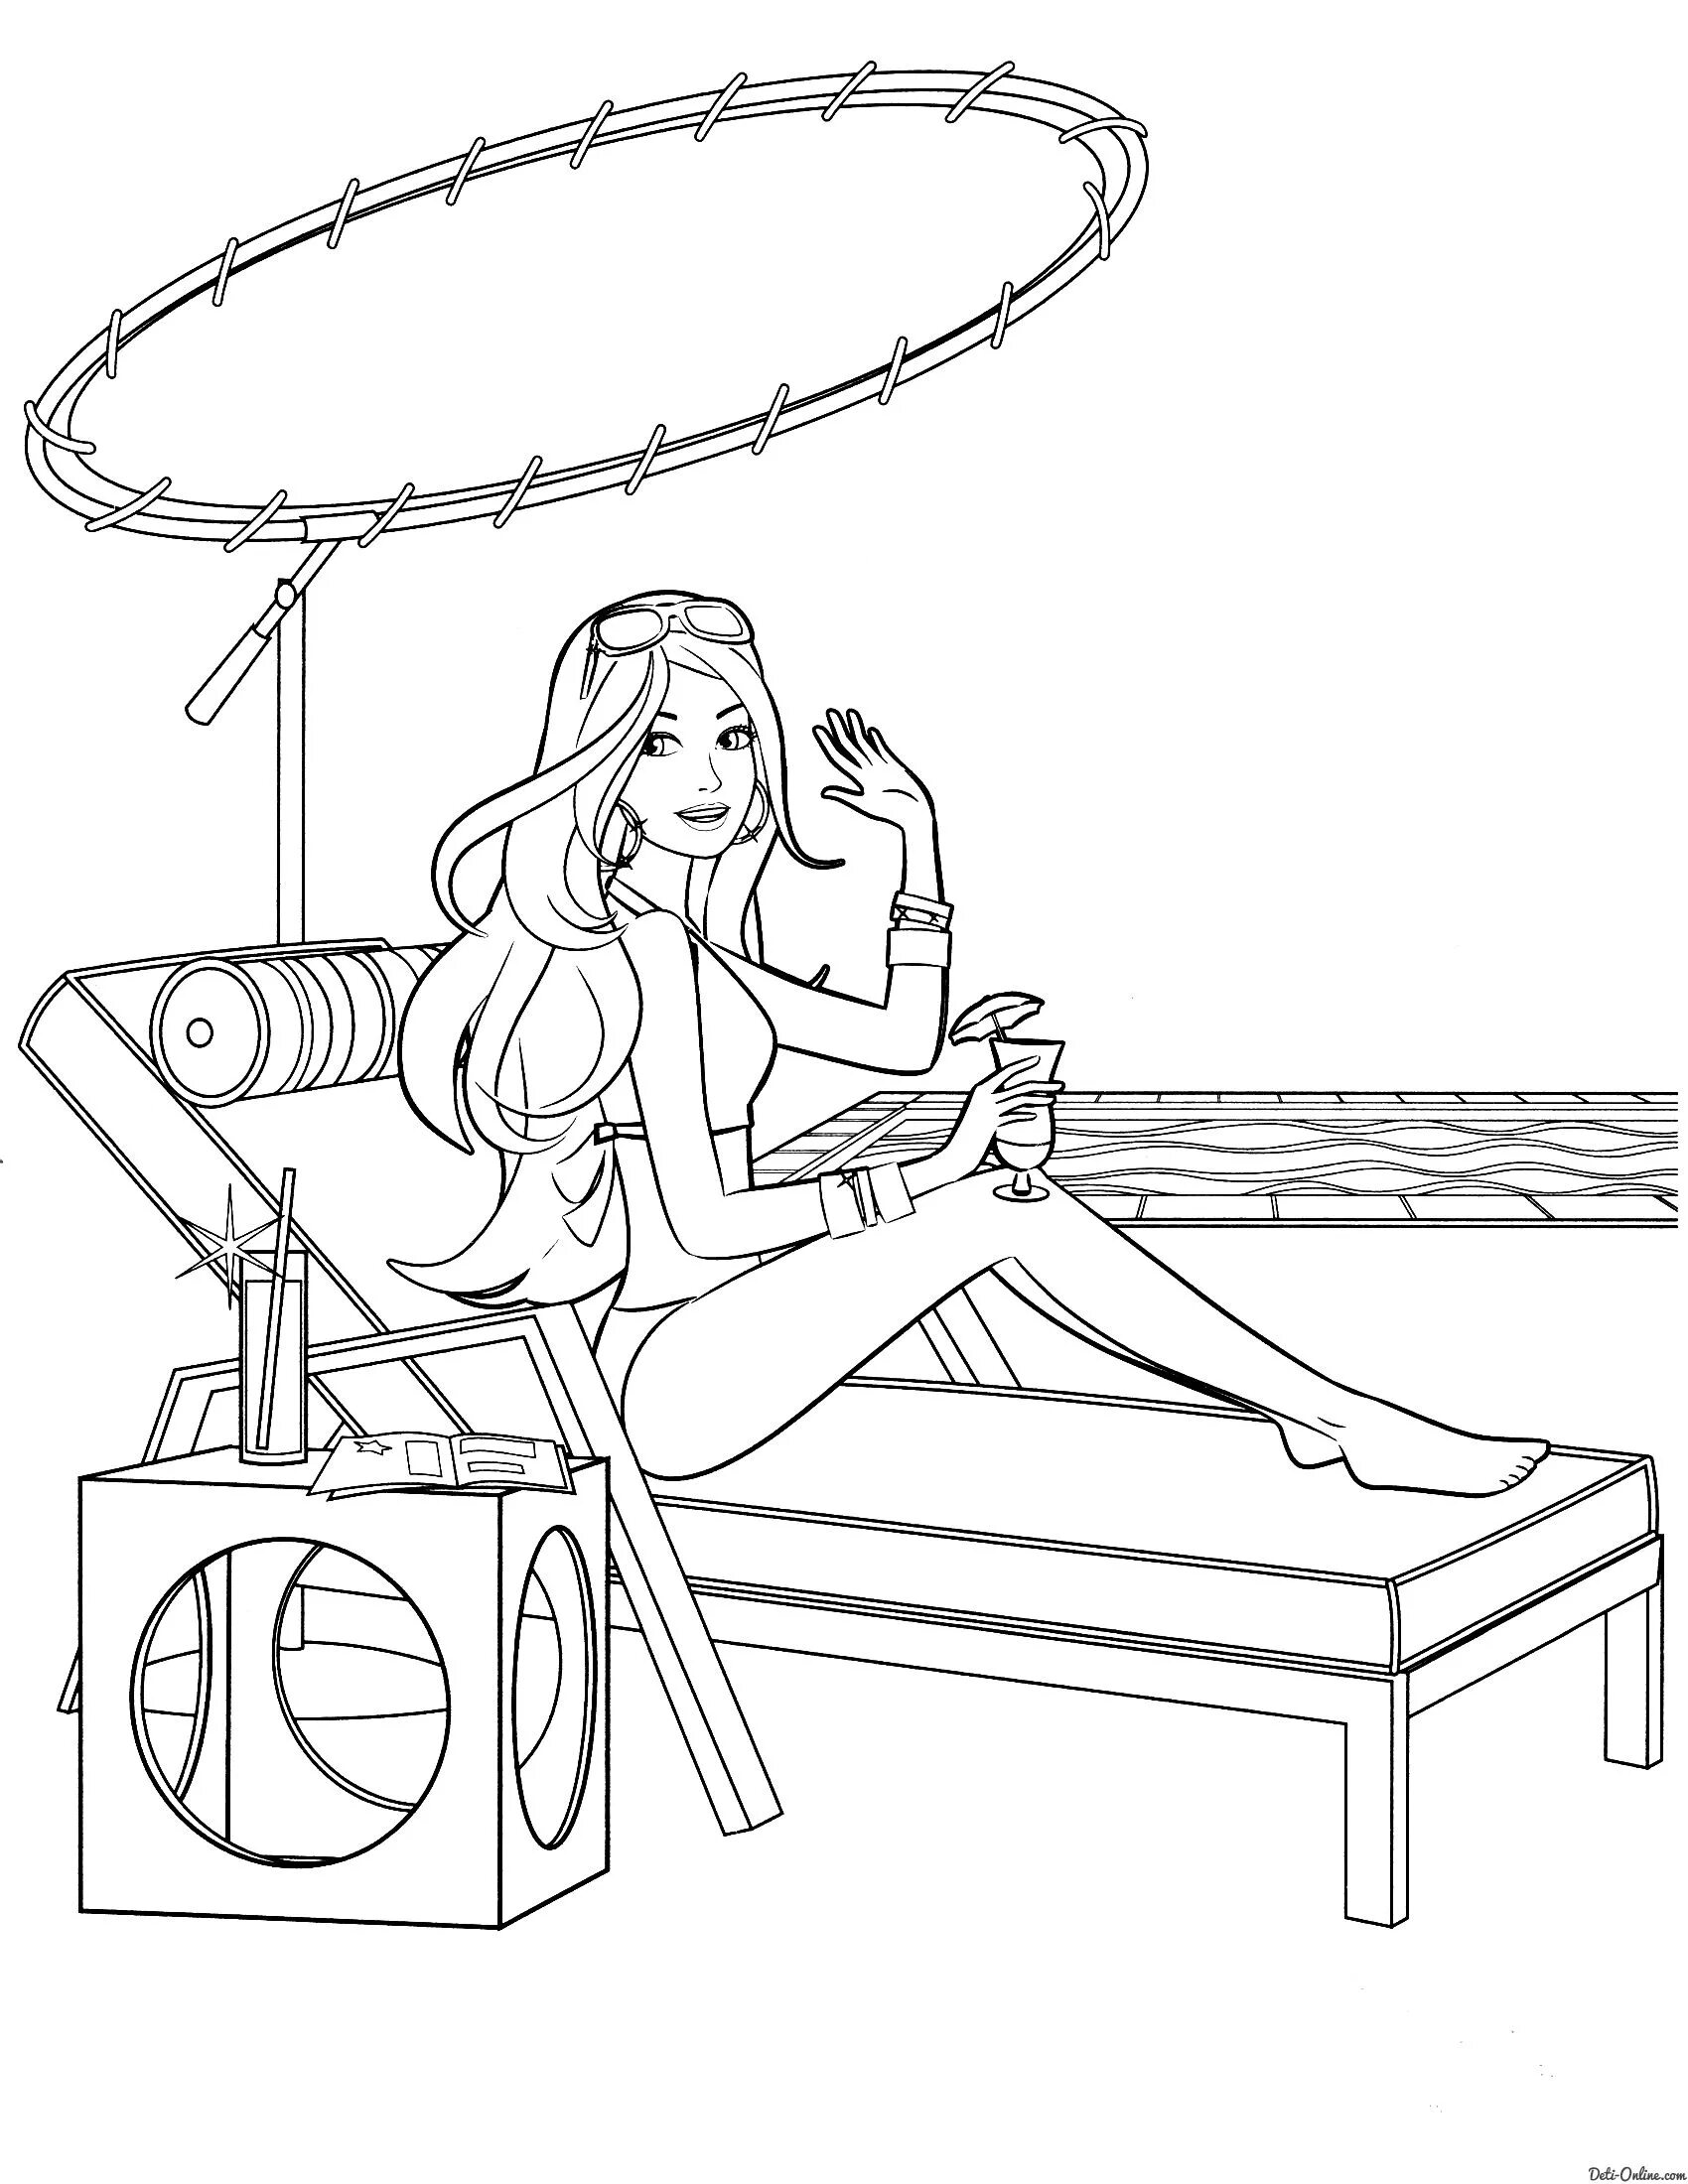 Barbie life coloring page on the beach